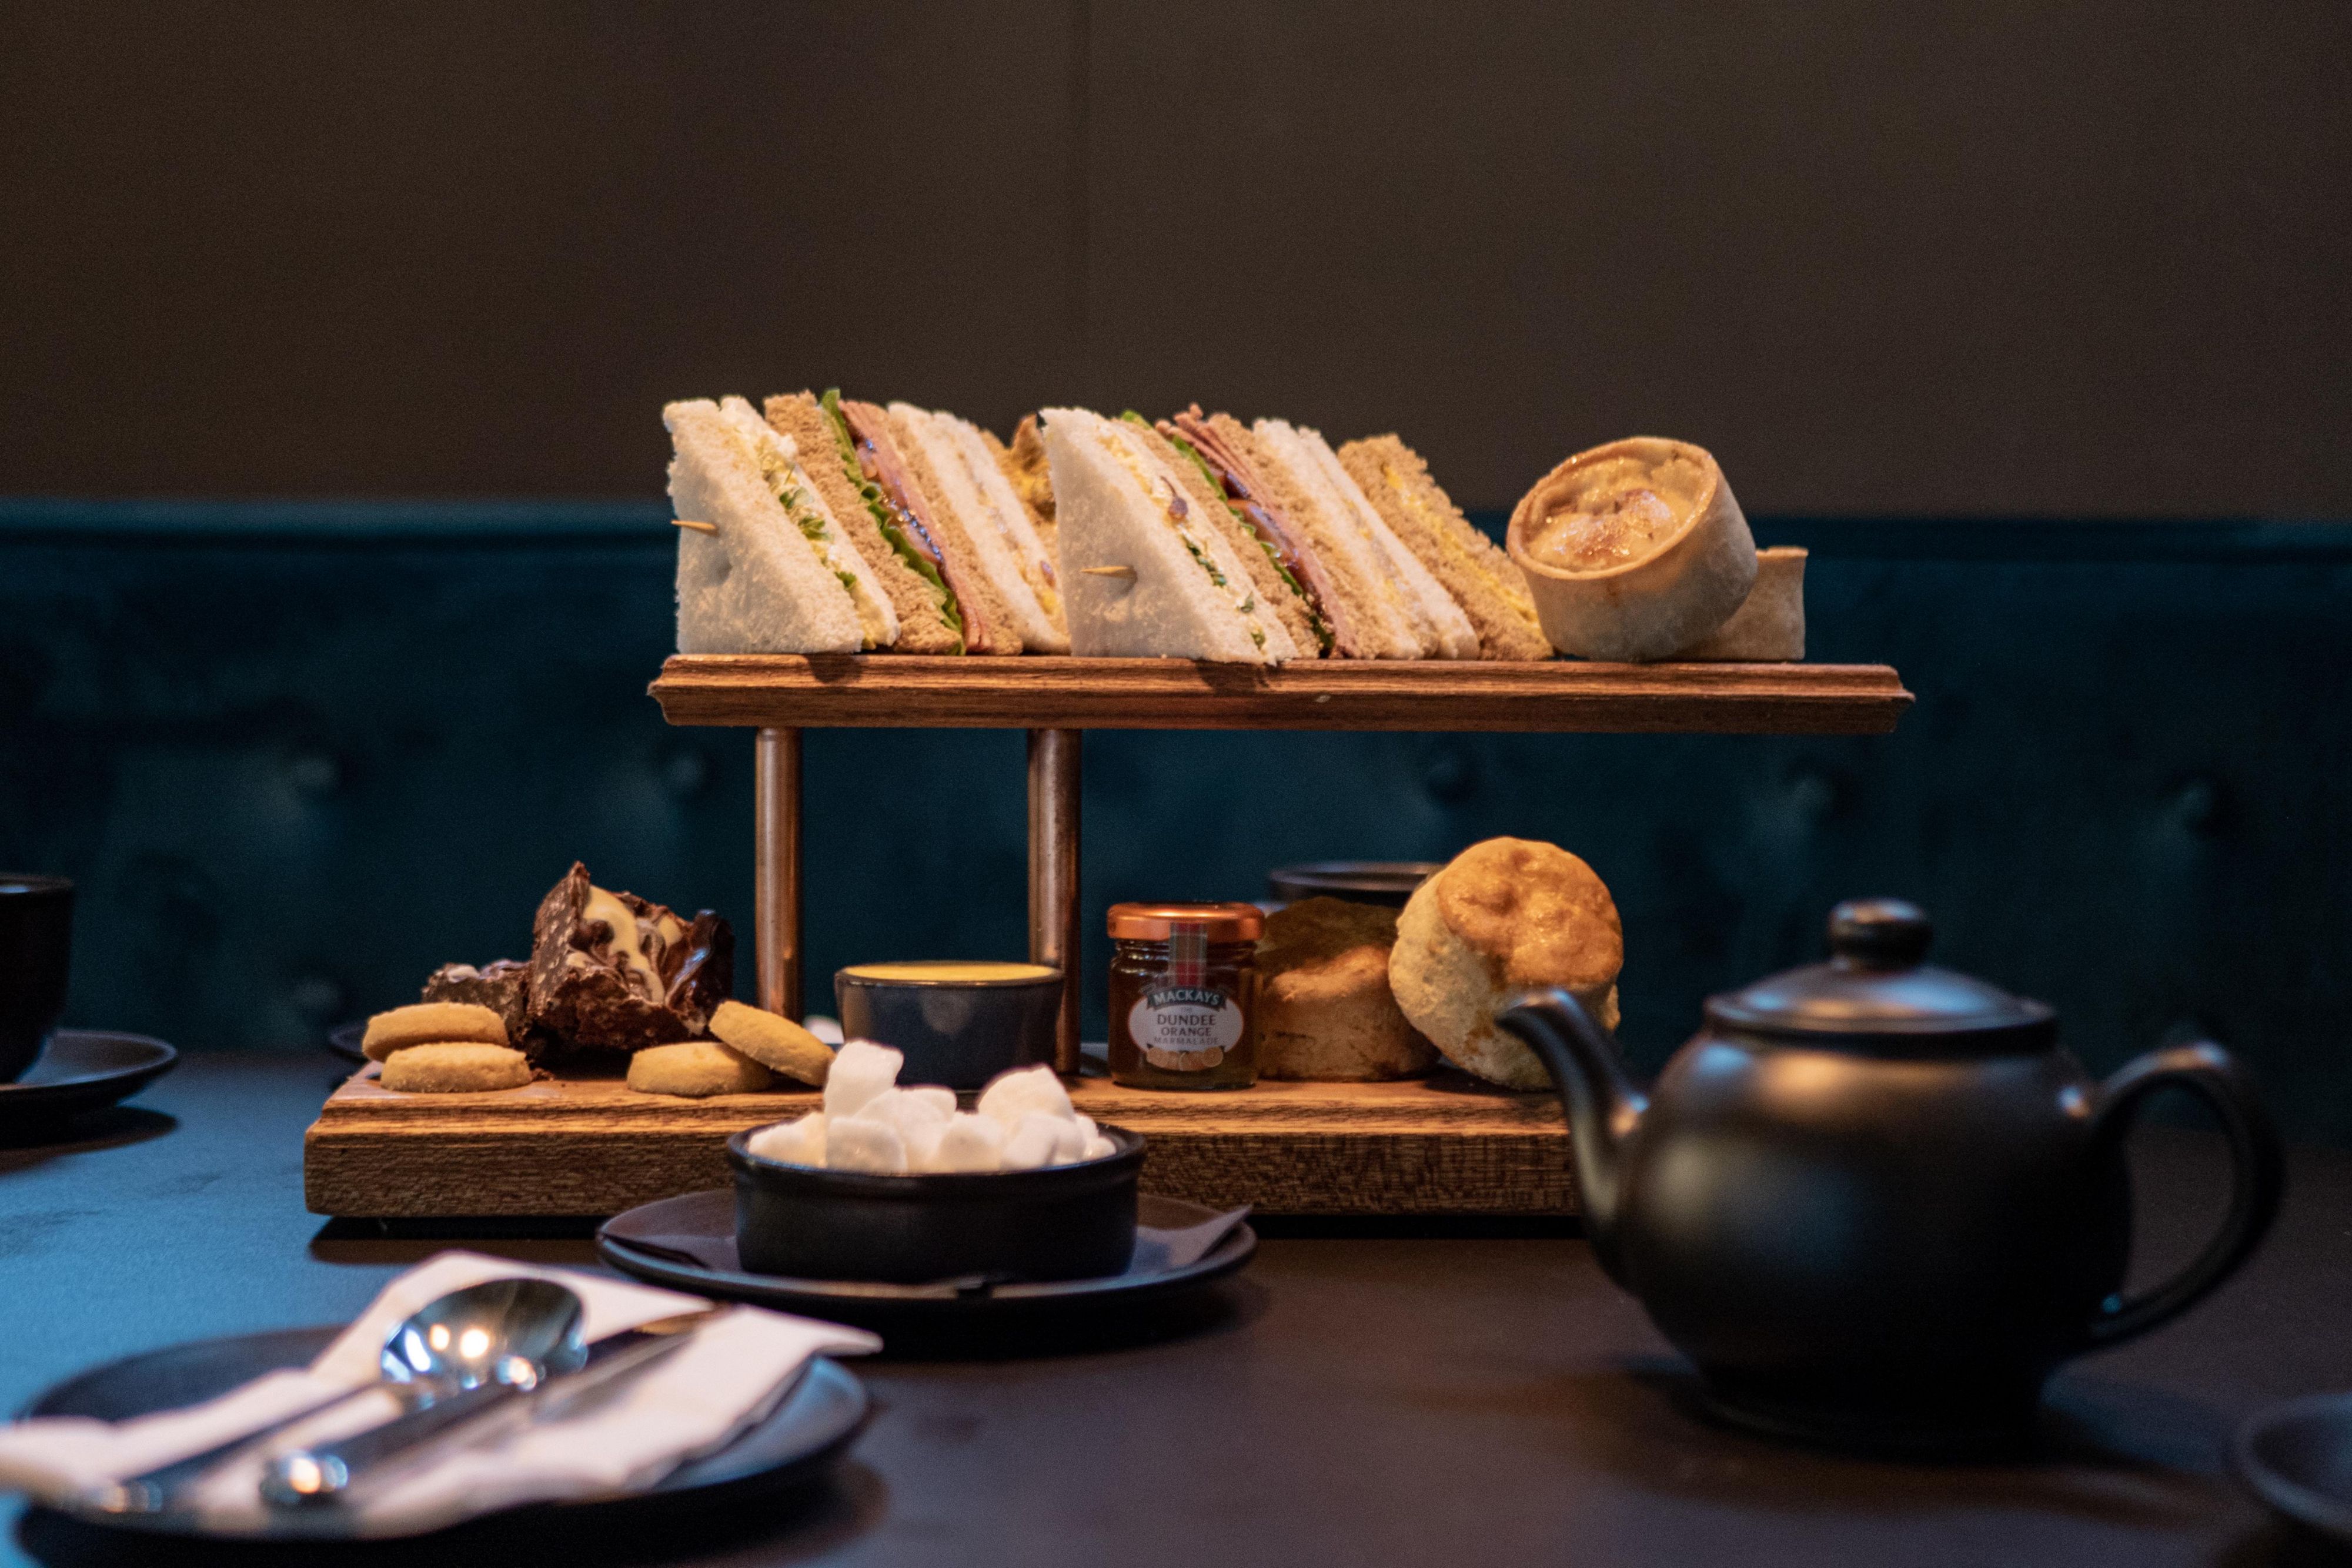 Join us at Daisy Tasker for afternoon tea with a Scottish twist! The menu features some of our city’s favourite bites including a butcher’s peh, a selection of pieces and a Dundee Marmalade slice! Available every weekend from 12:30pm – 5:00pm. Book your table today!